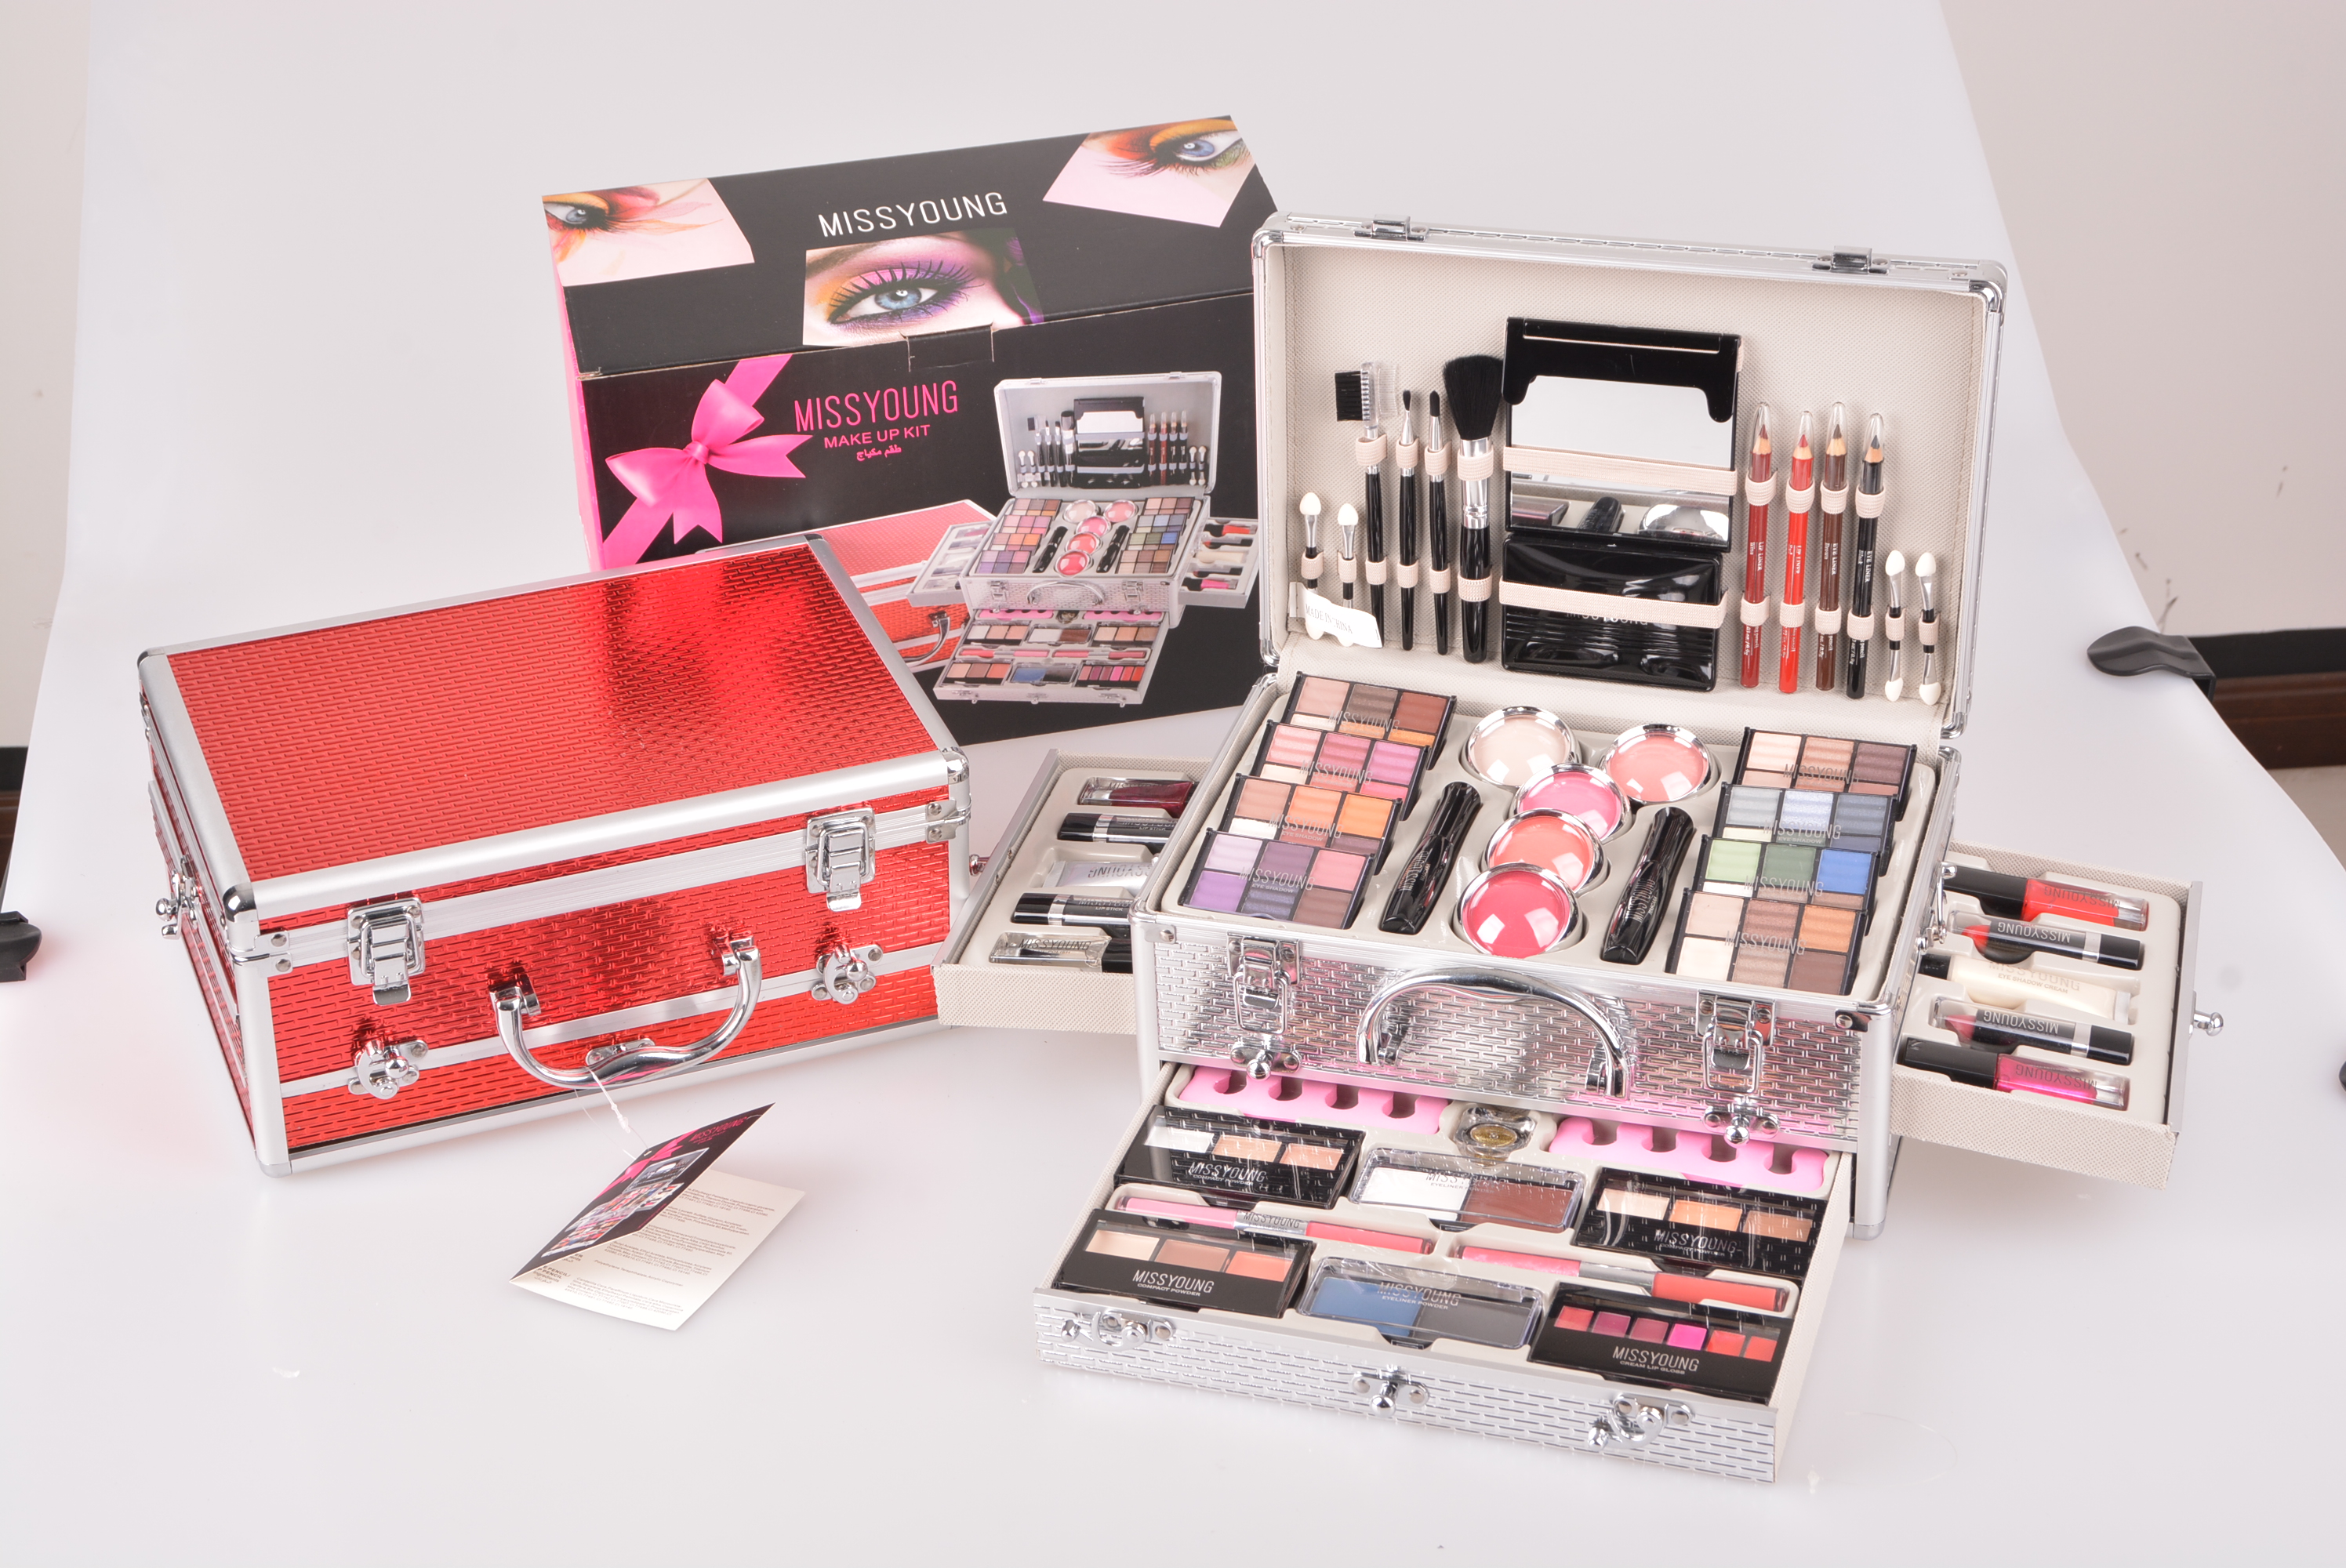 Miss Young Hot Sale Travel Cosmetic Bag Box 24pcs Brush Set Private Label Girls Beauty Set Children Makeup Toys